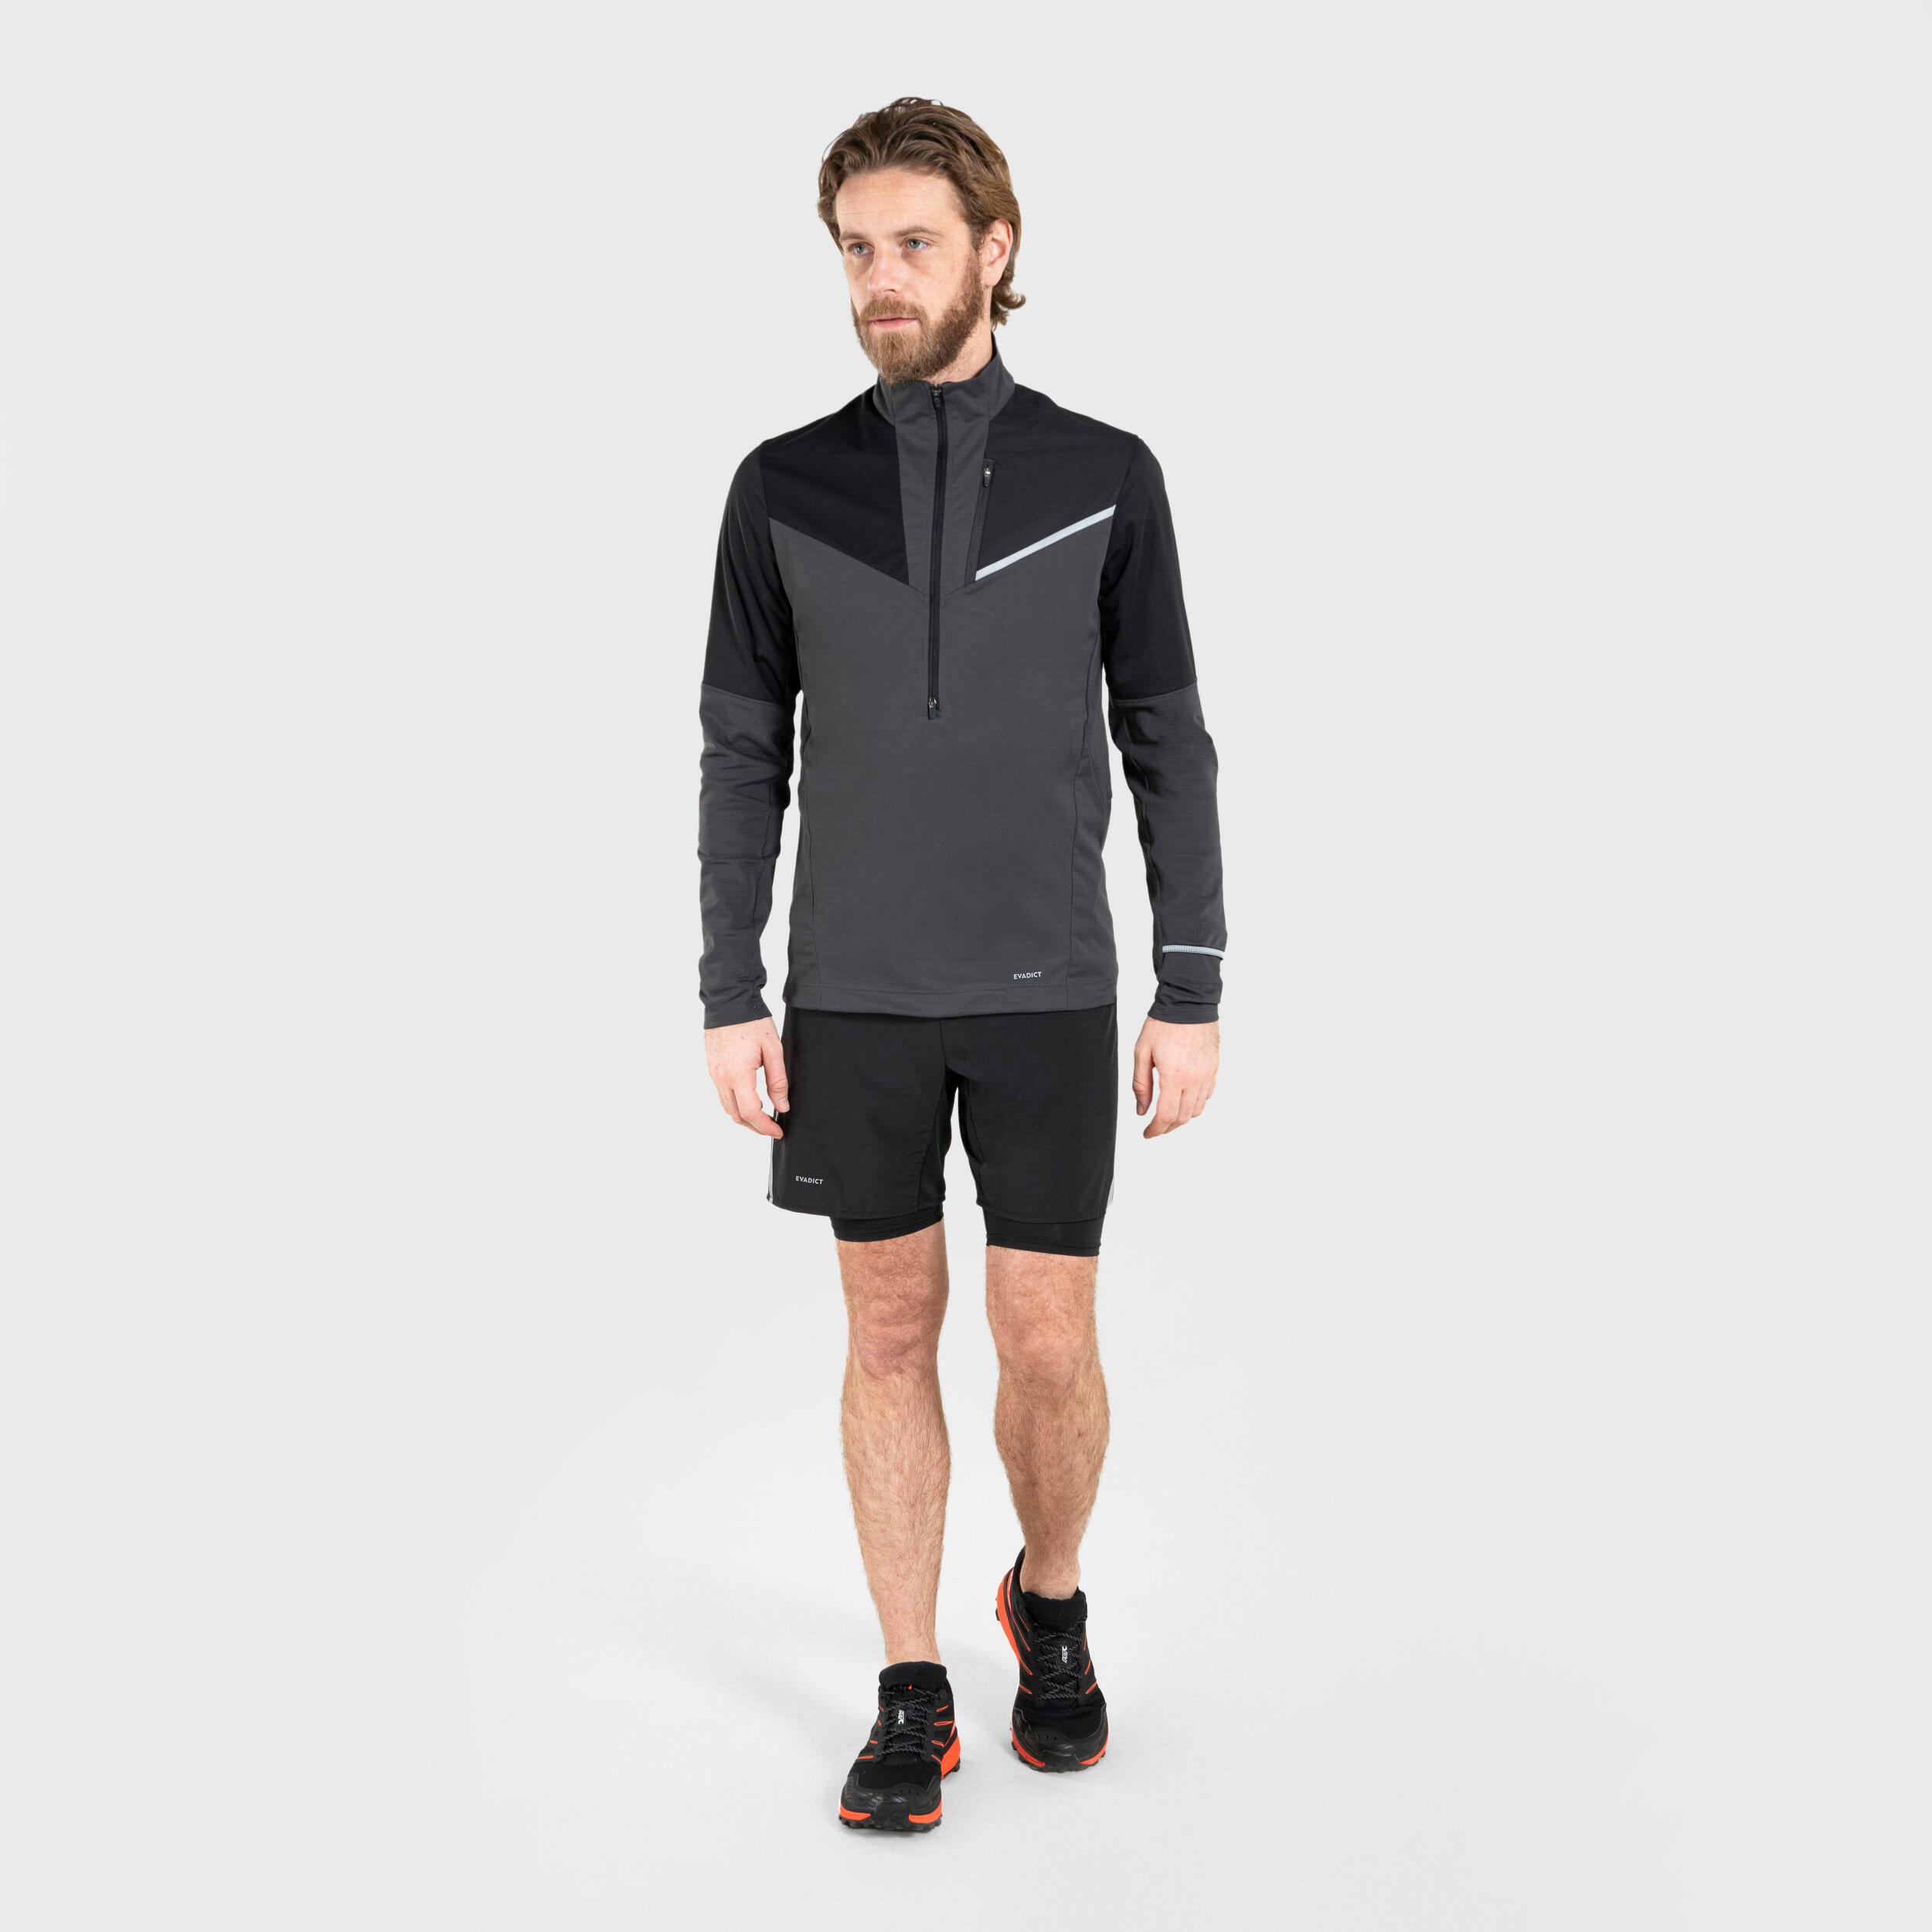 MAILLOT DE TRAIL RUNNING MANCHES LONGUES SOFTSHELL HOMME NOIR GRIS 7/8